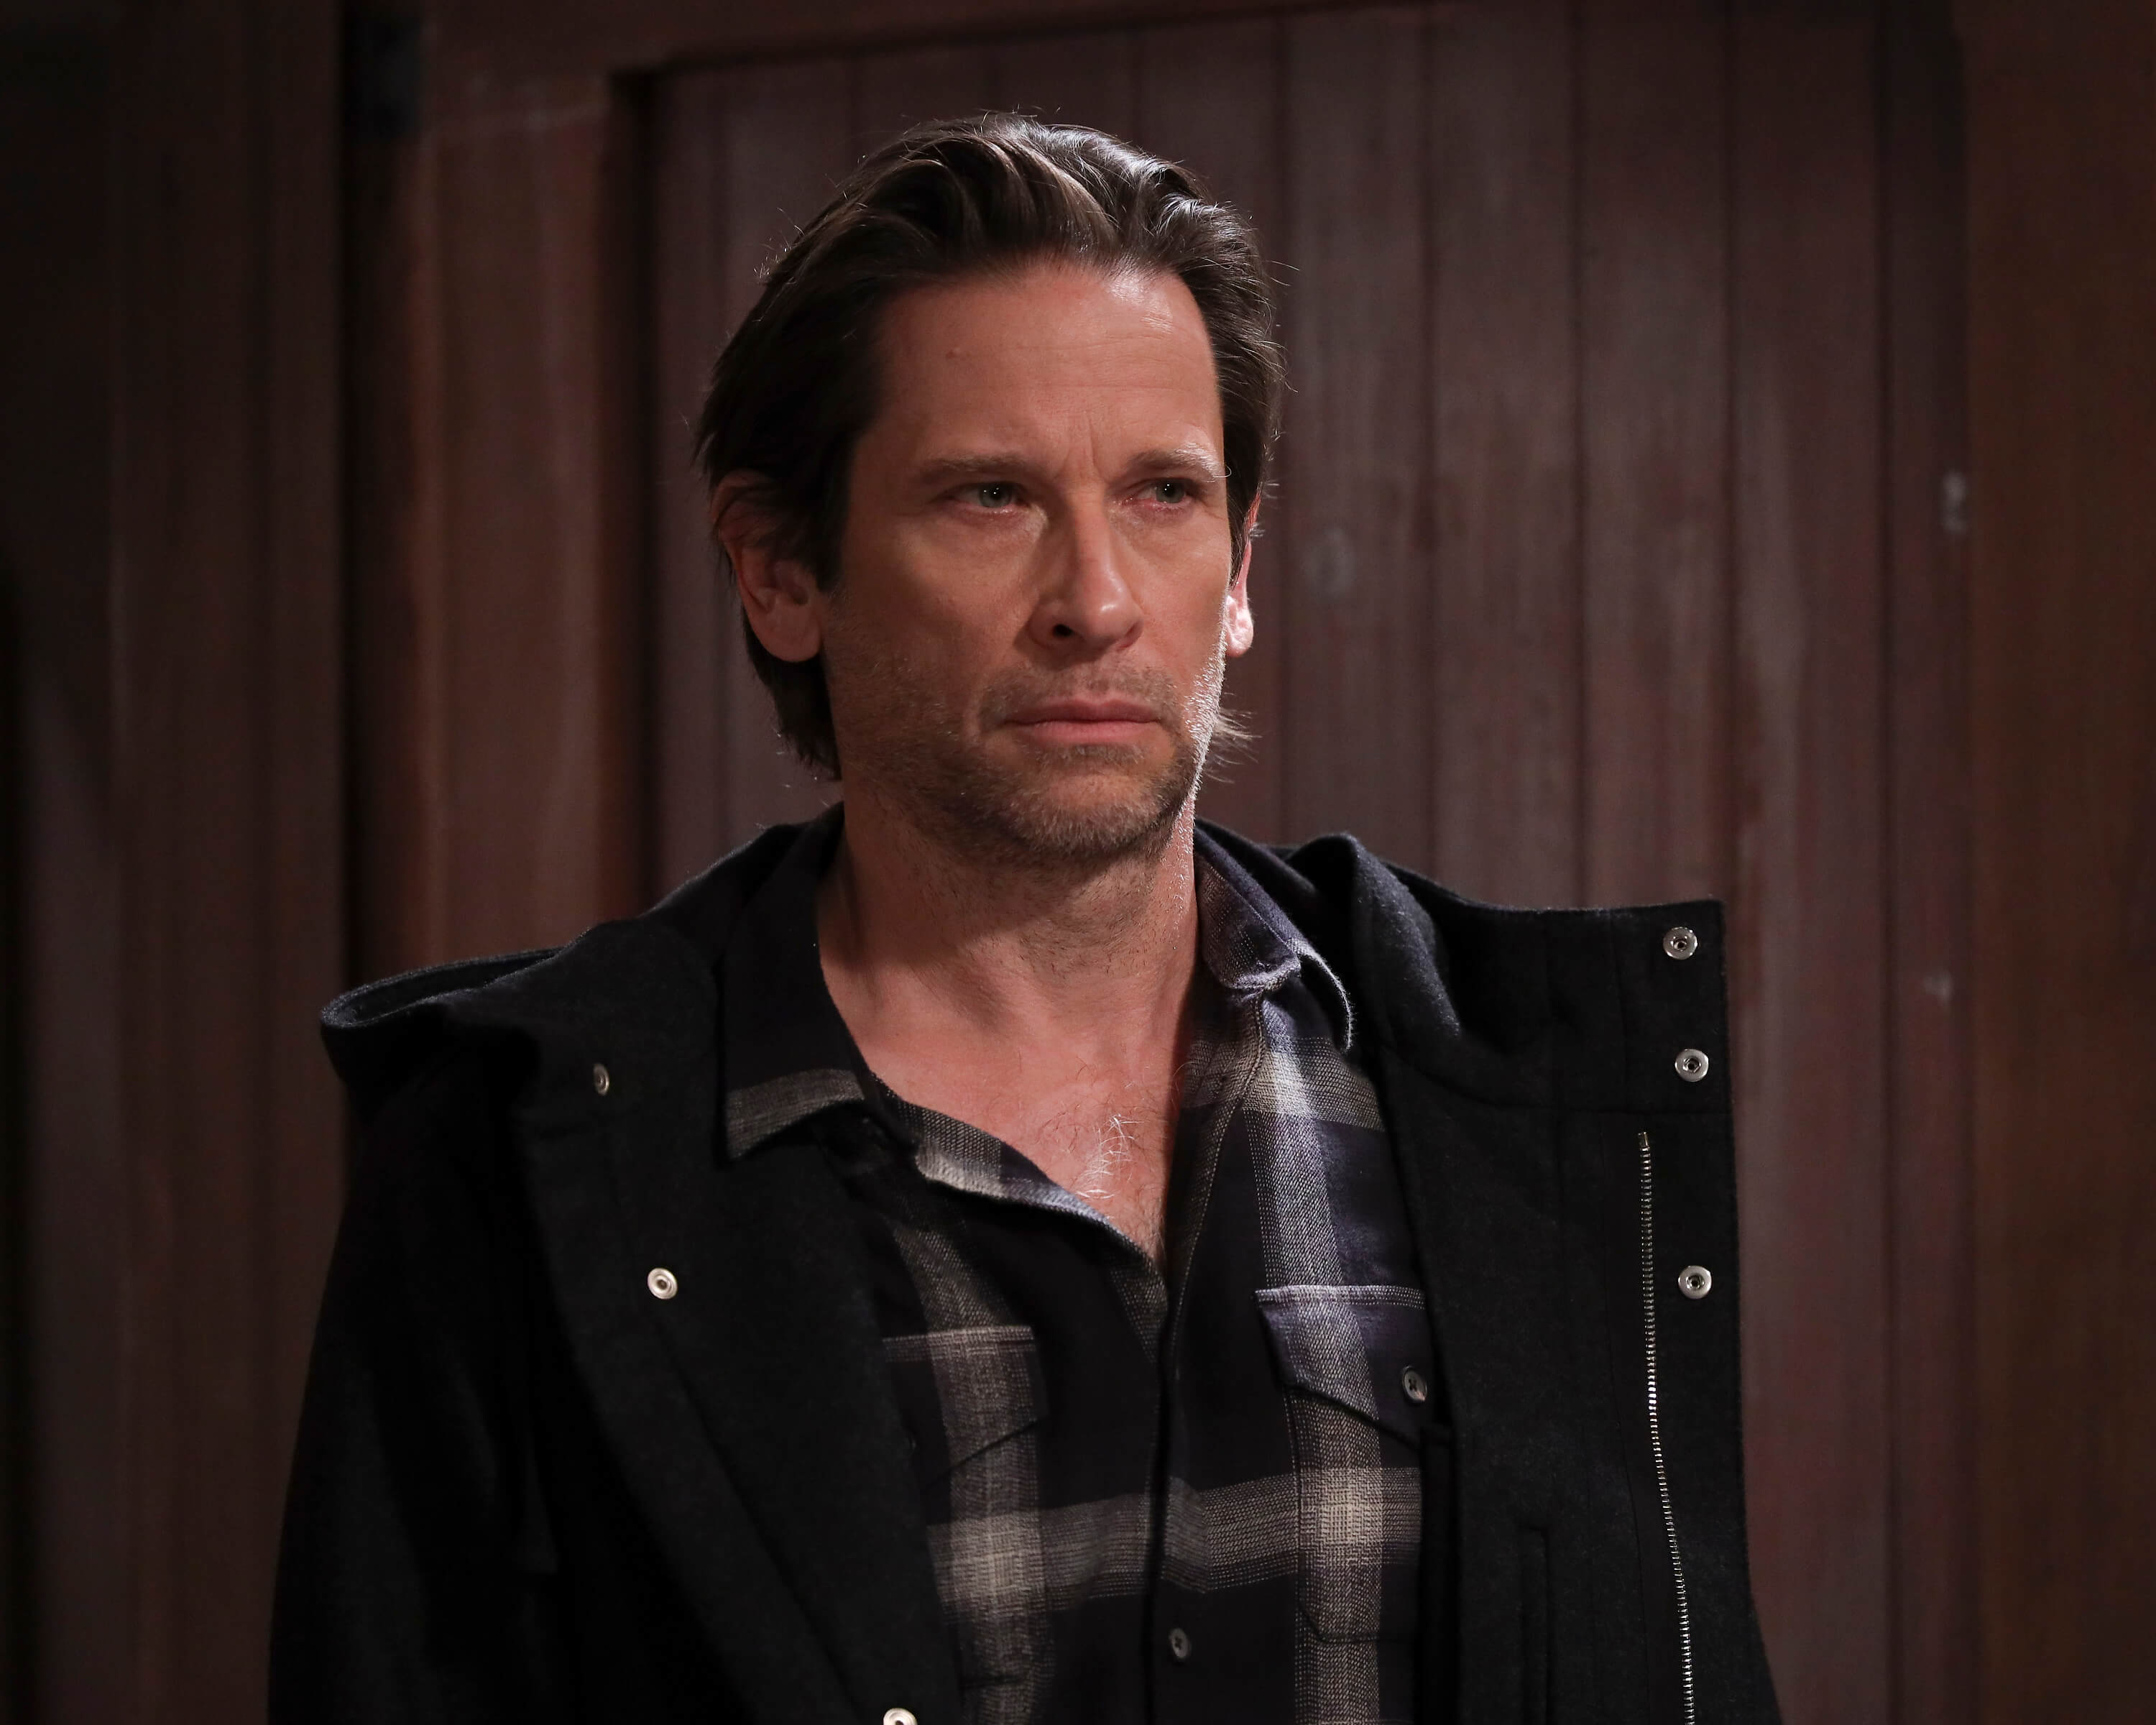 'General Hospital' star Roger Howarth dressed in a plaid shirt and black jacket; in a scene from the soap opera.